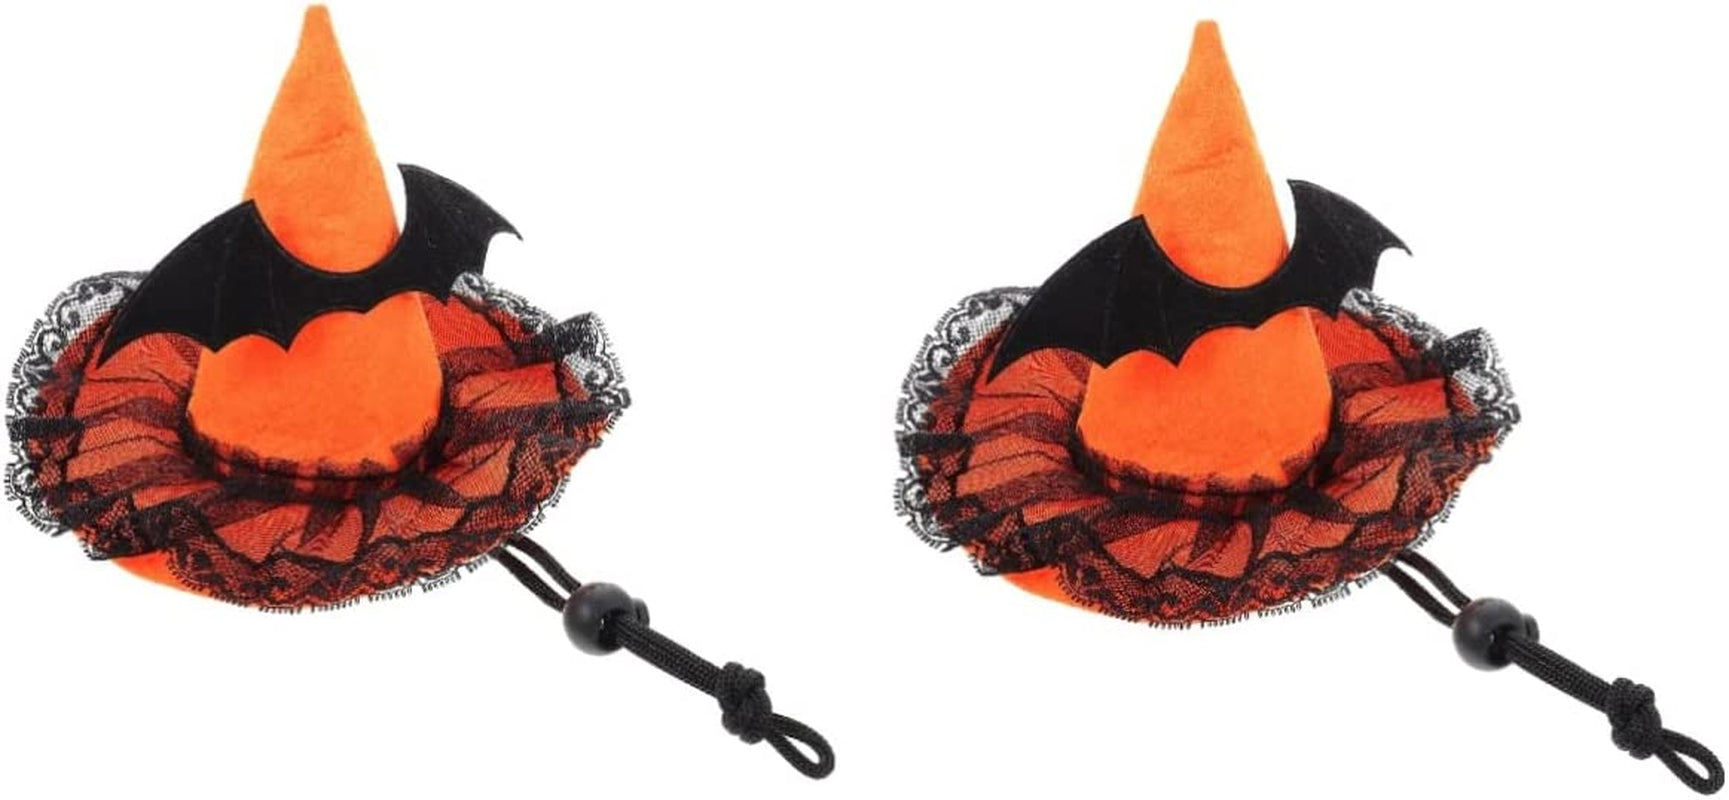 Balacoo Wizard Hat Adorable Decorative Costume for Props Witch Headgear Theme with Costumes Cute Supply Cone Lace Pet Dog Wear-Resistant Supplies Themed Hats Bat Black Pumpkin Funny